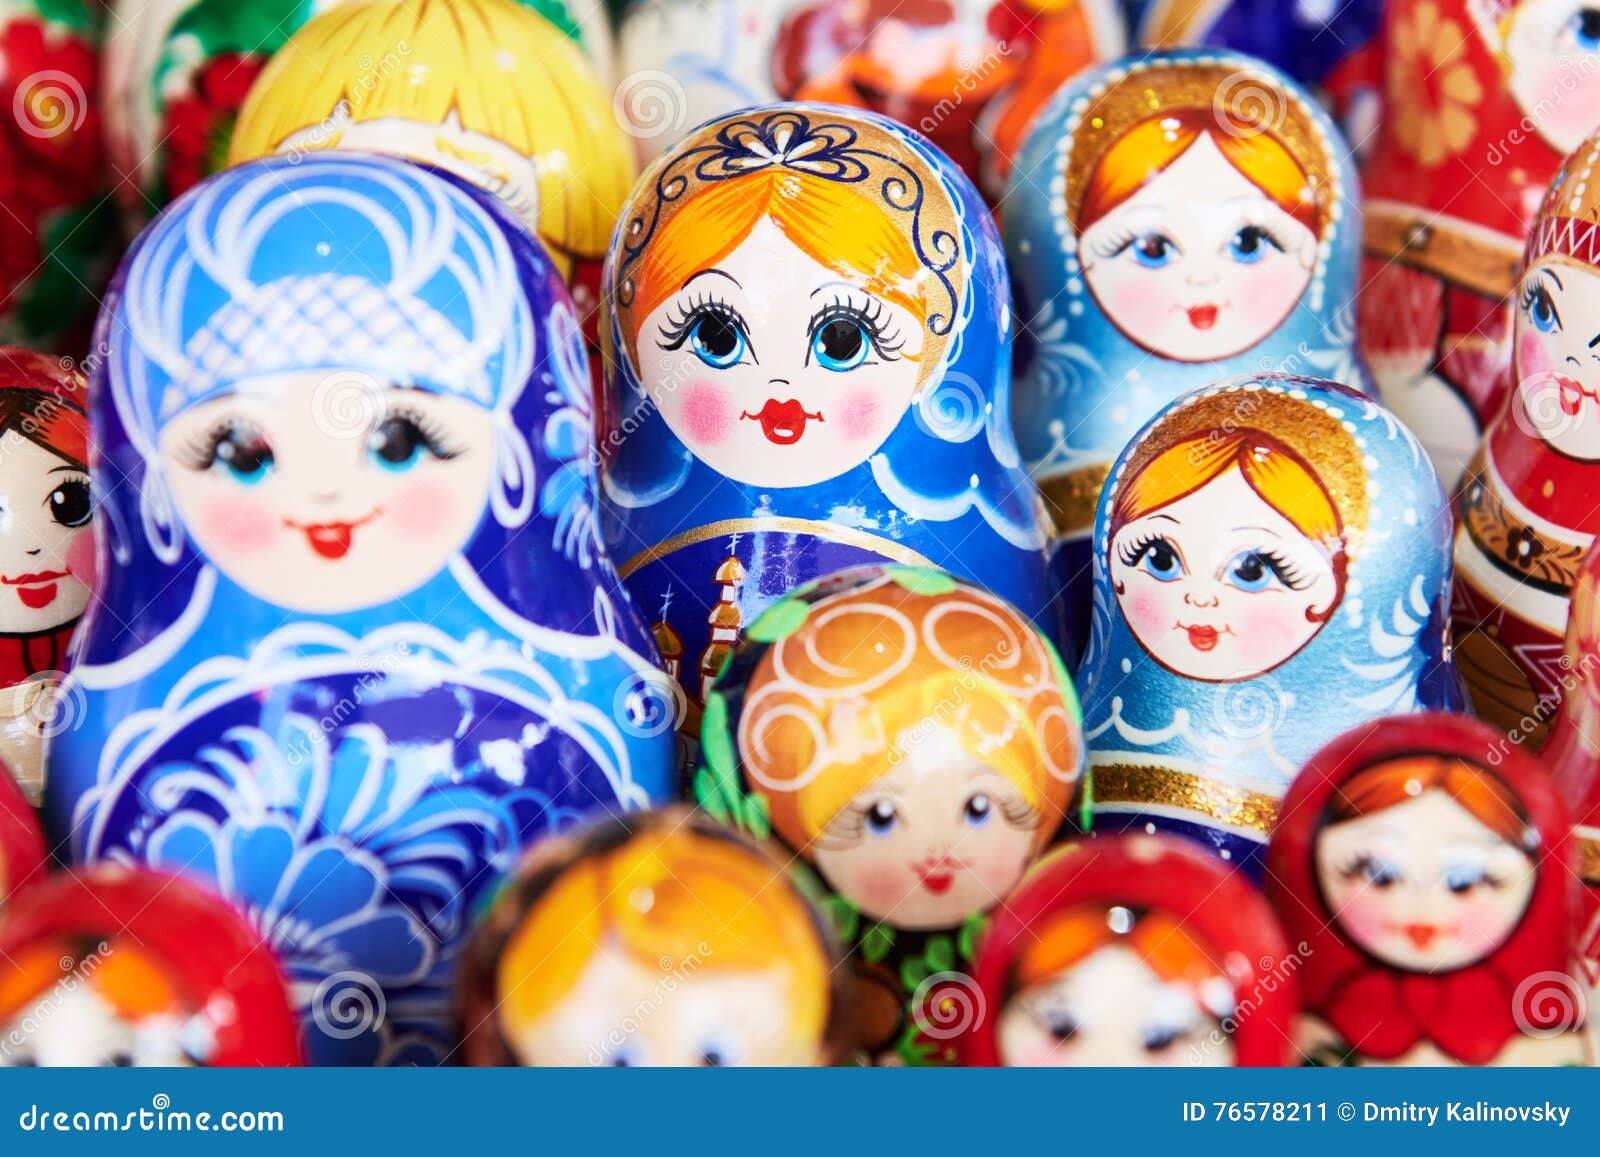 traditional russian wooden nesting dolls